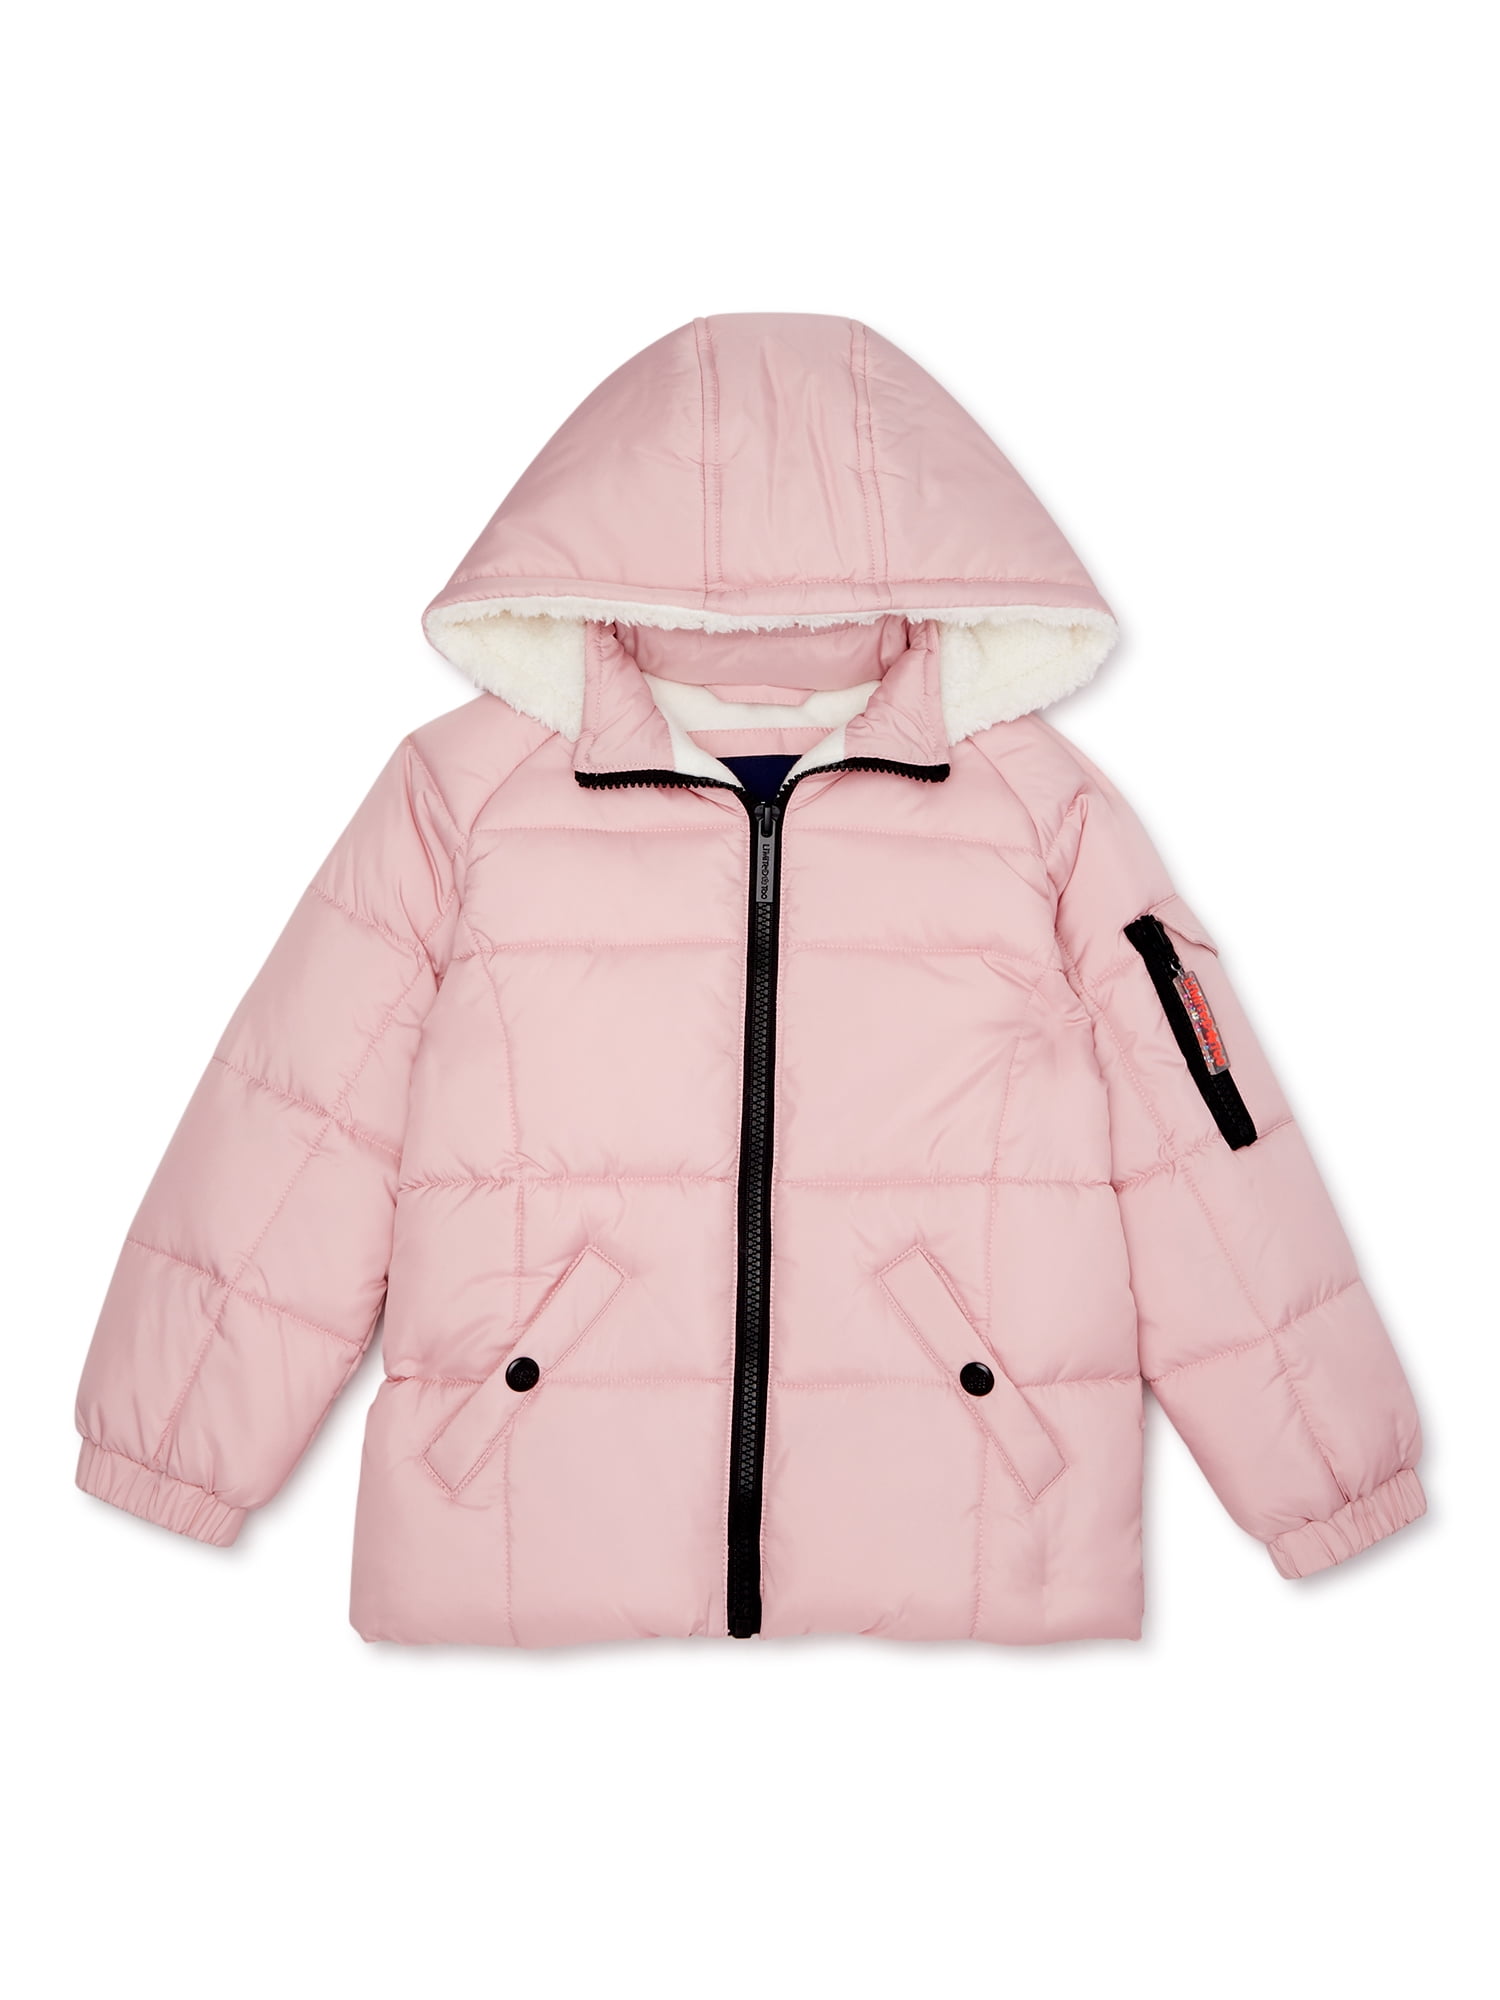 Limited Too Girls Puffer Jacket with Sherpa Fleece Lined Hood, Sizes 4 ...